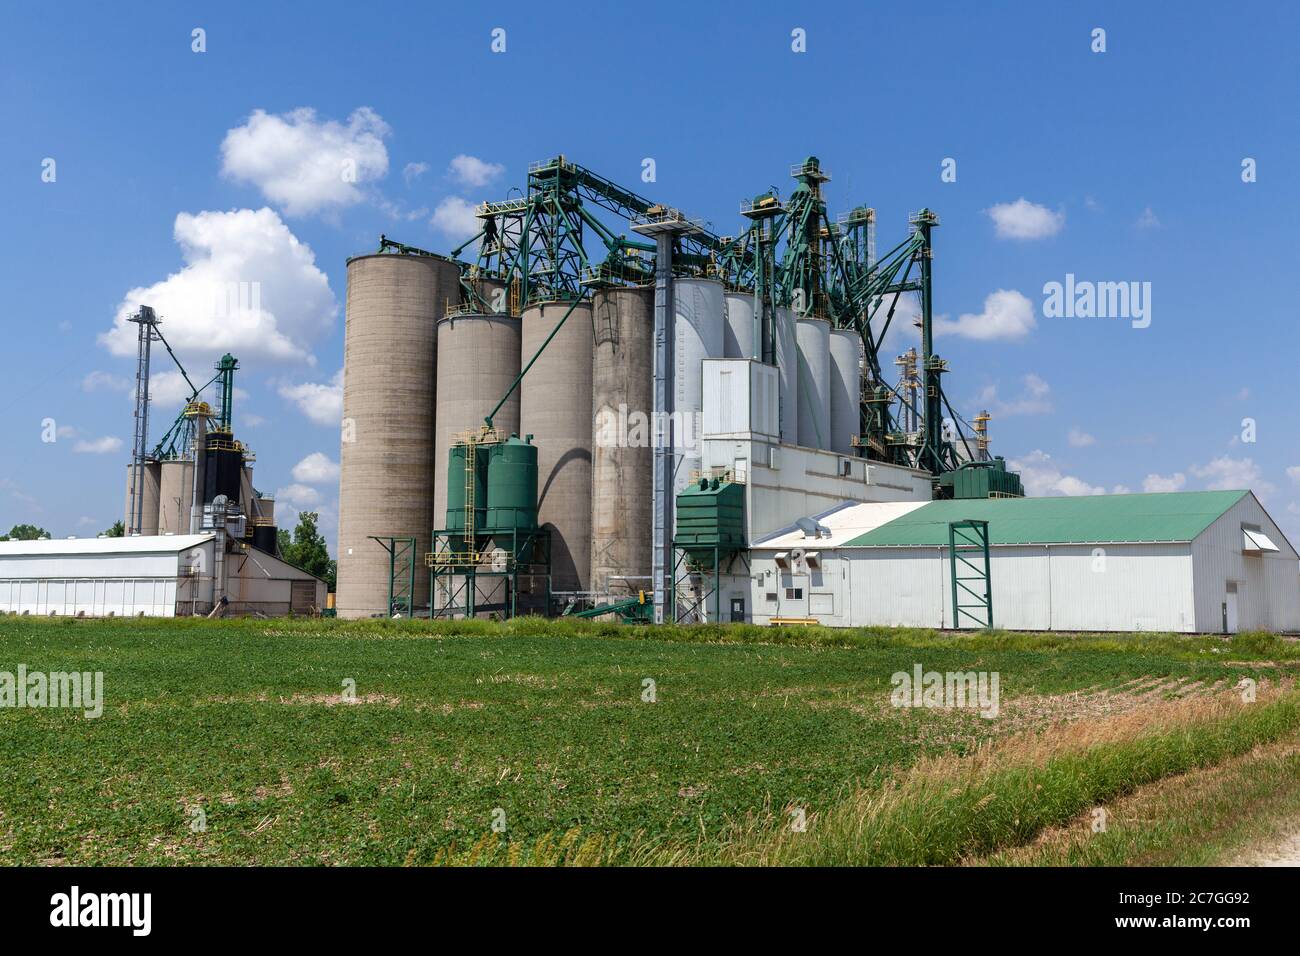 Thompsons Grain Elevator In Mitchell Ontario Canada Agricultral Products Storage And Distribution Stock Photo